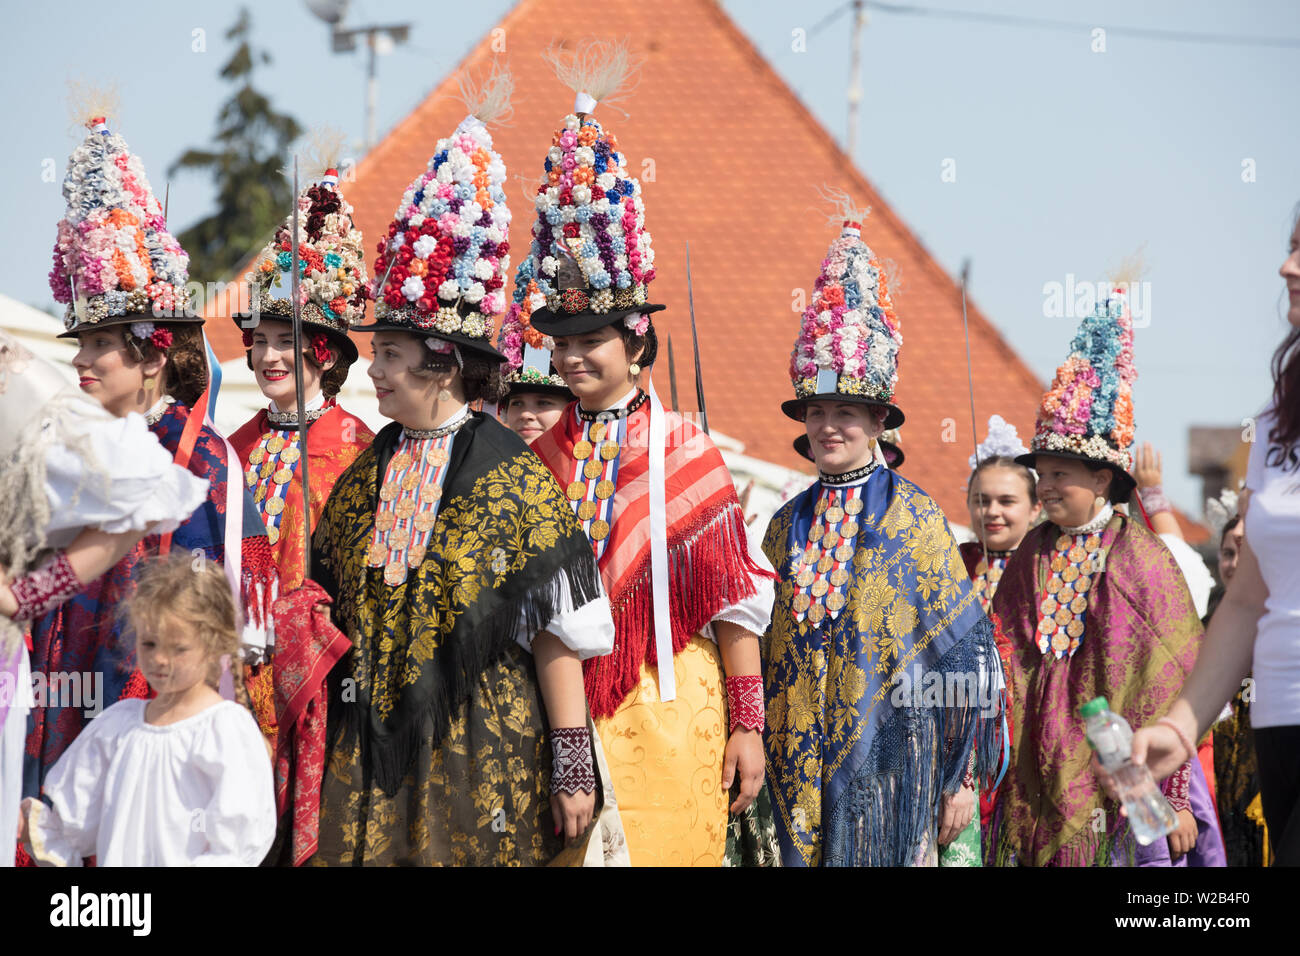 Dakovo, Croatia. 7th July, 2019. People in traditional costumes take part in the 53rd Dakovacki vezovi festival in Dakovo, Croatia, on July 7, 2019. Dakovacki vezovi festival, one of the major cultural events in Croatia, presents traditional costumes and performances. Credit: Dubravka Petric/Xinhua/Alamy Live News Stock Photo